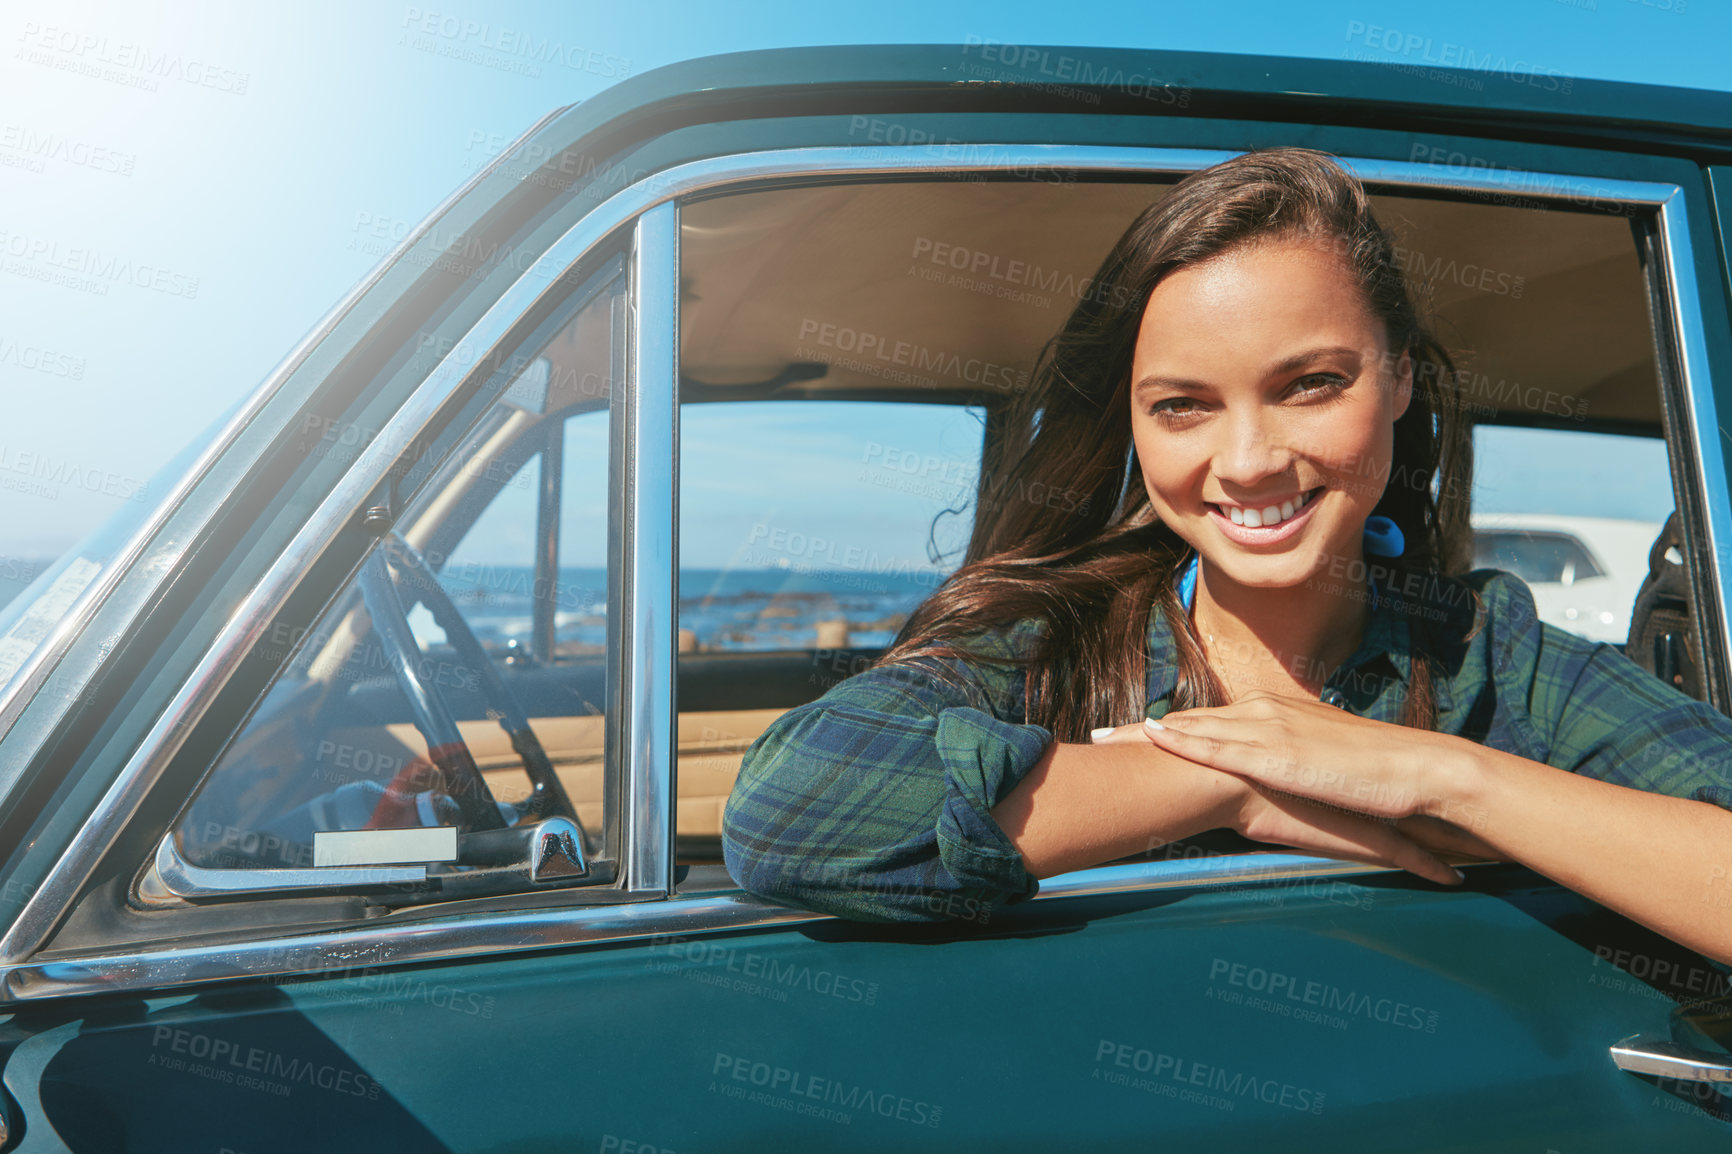 Buy stock photo Shot of a young woman on a road trip near the ocean